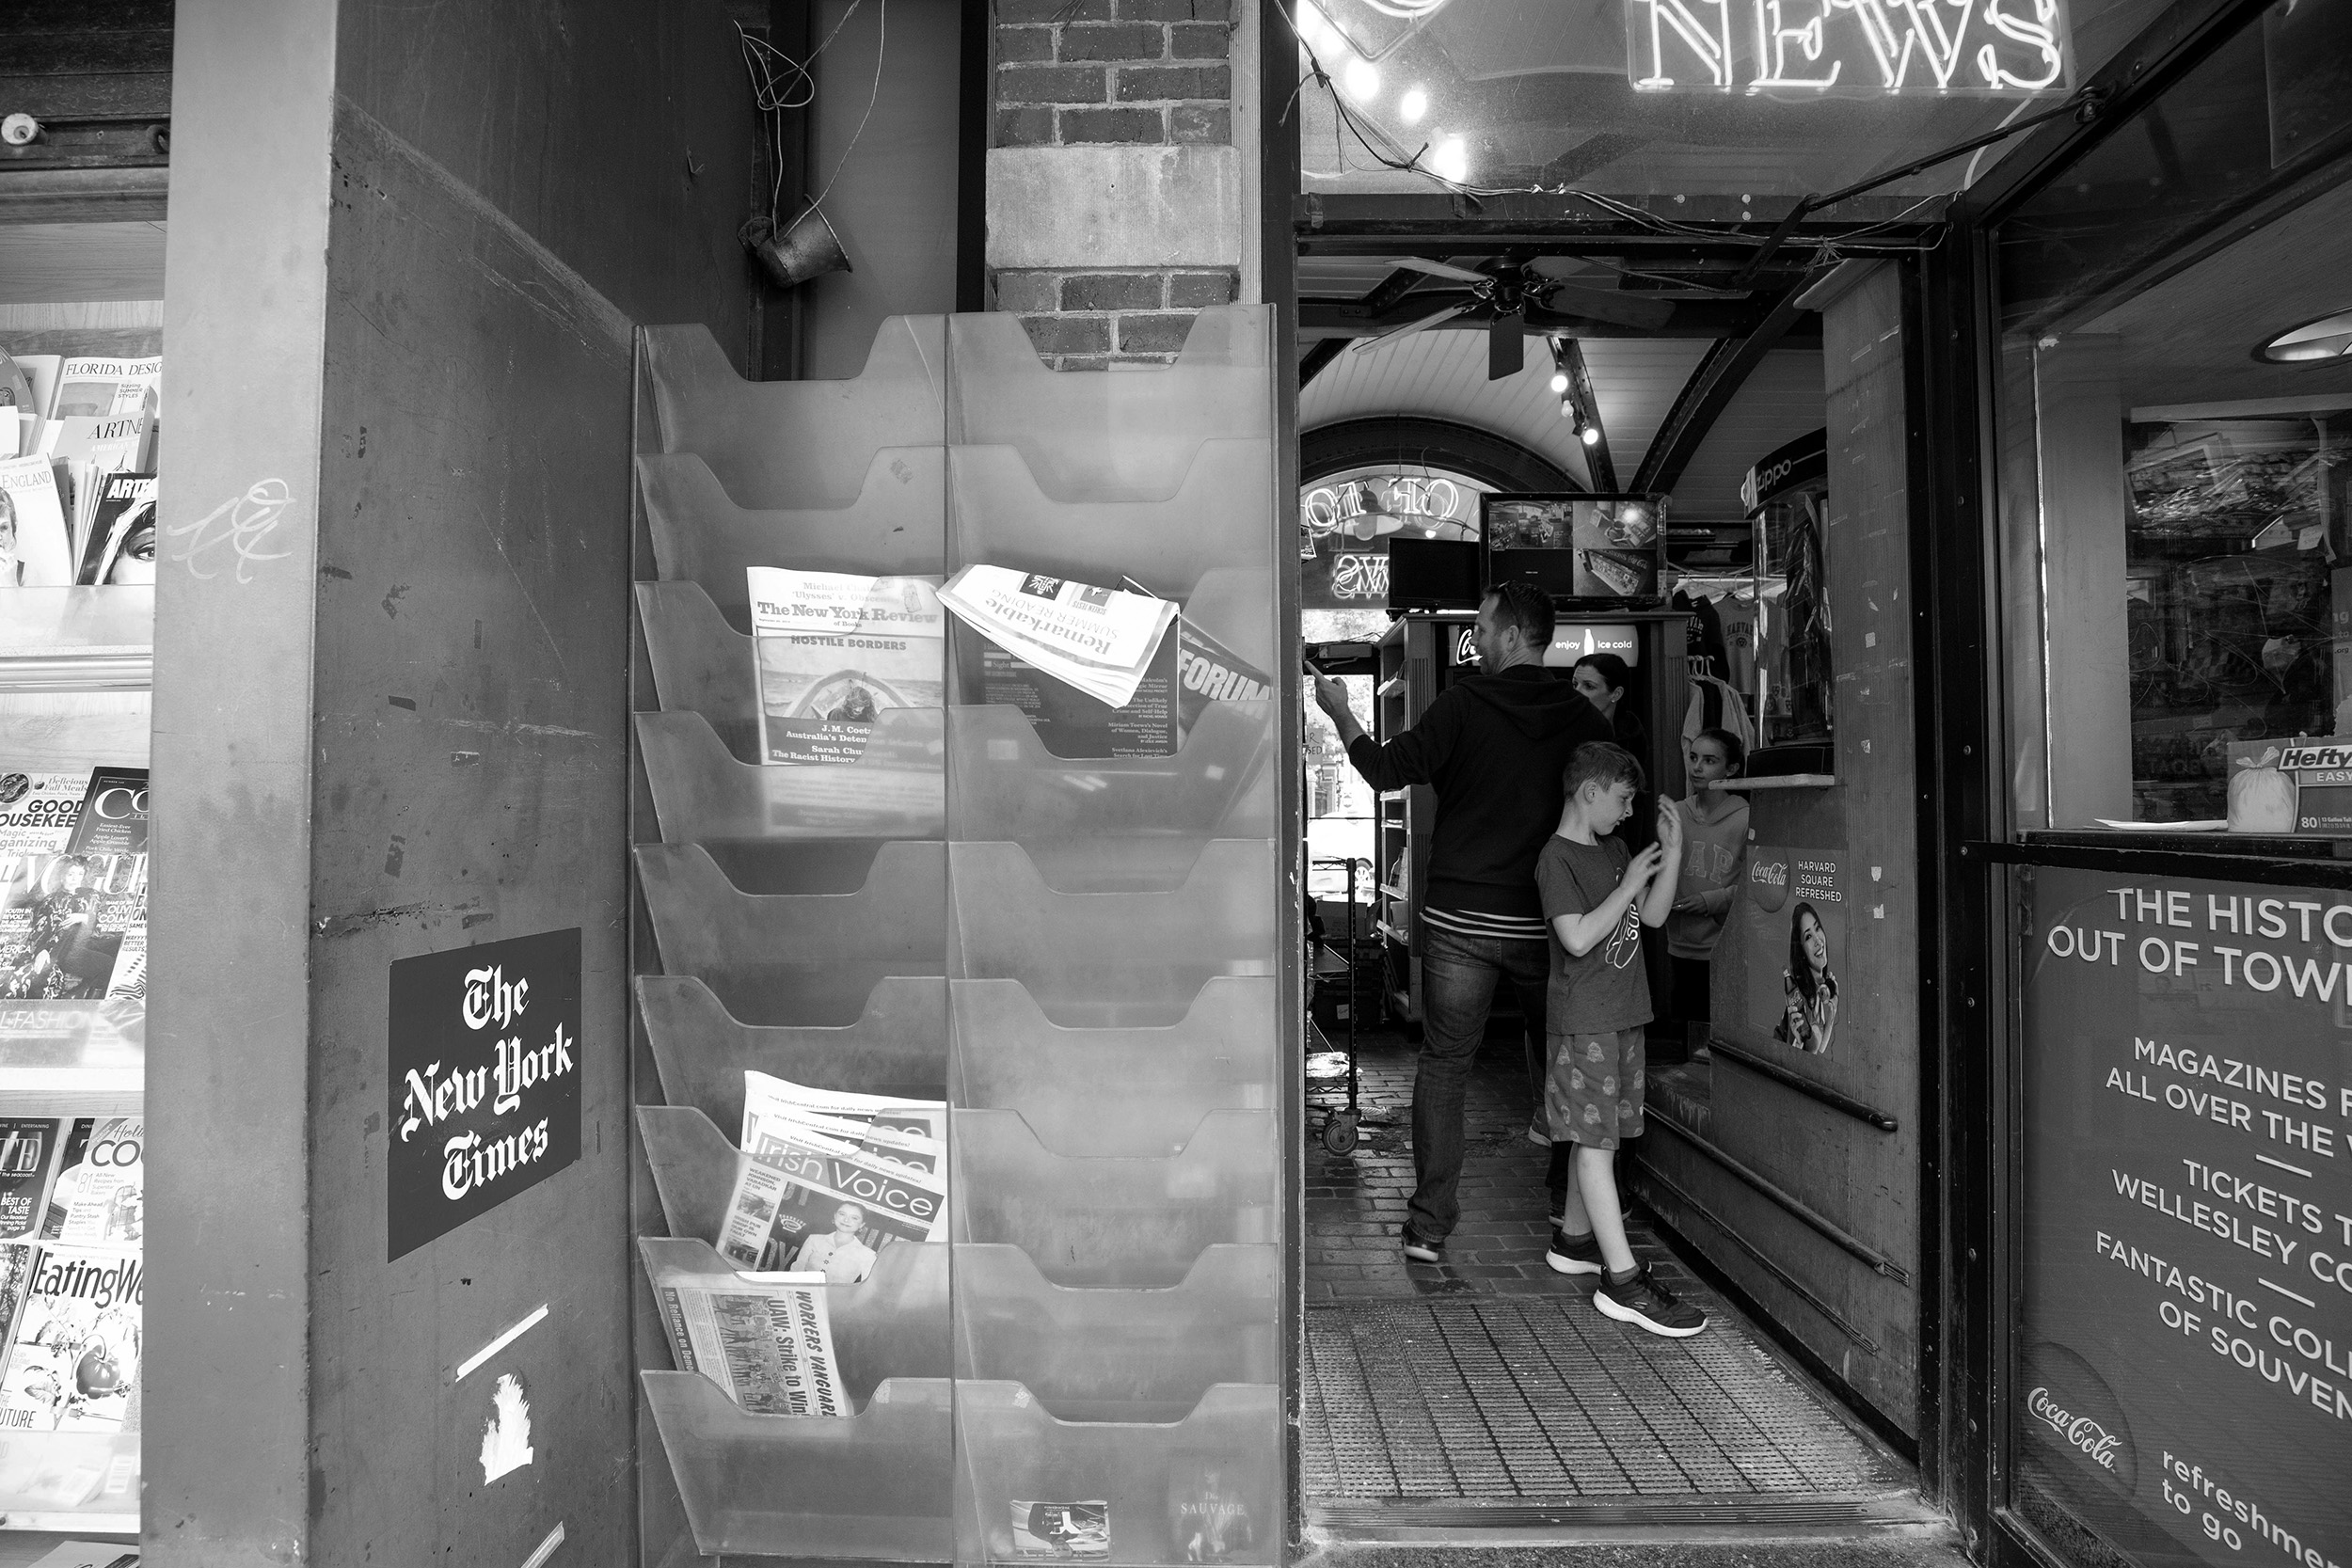 Looking inside the newsstand.